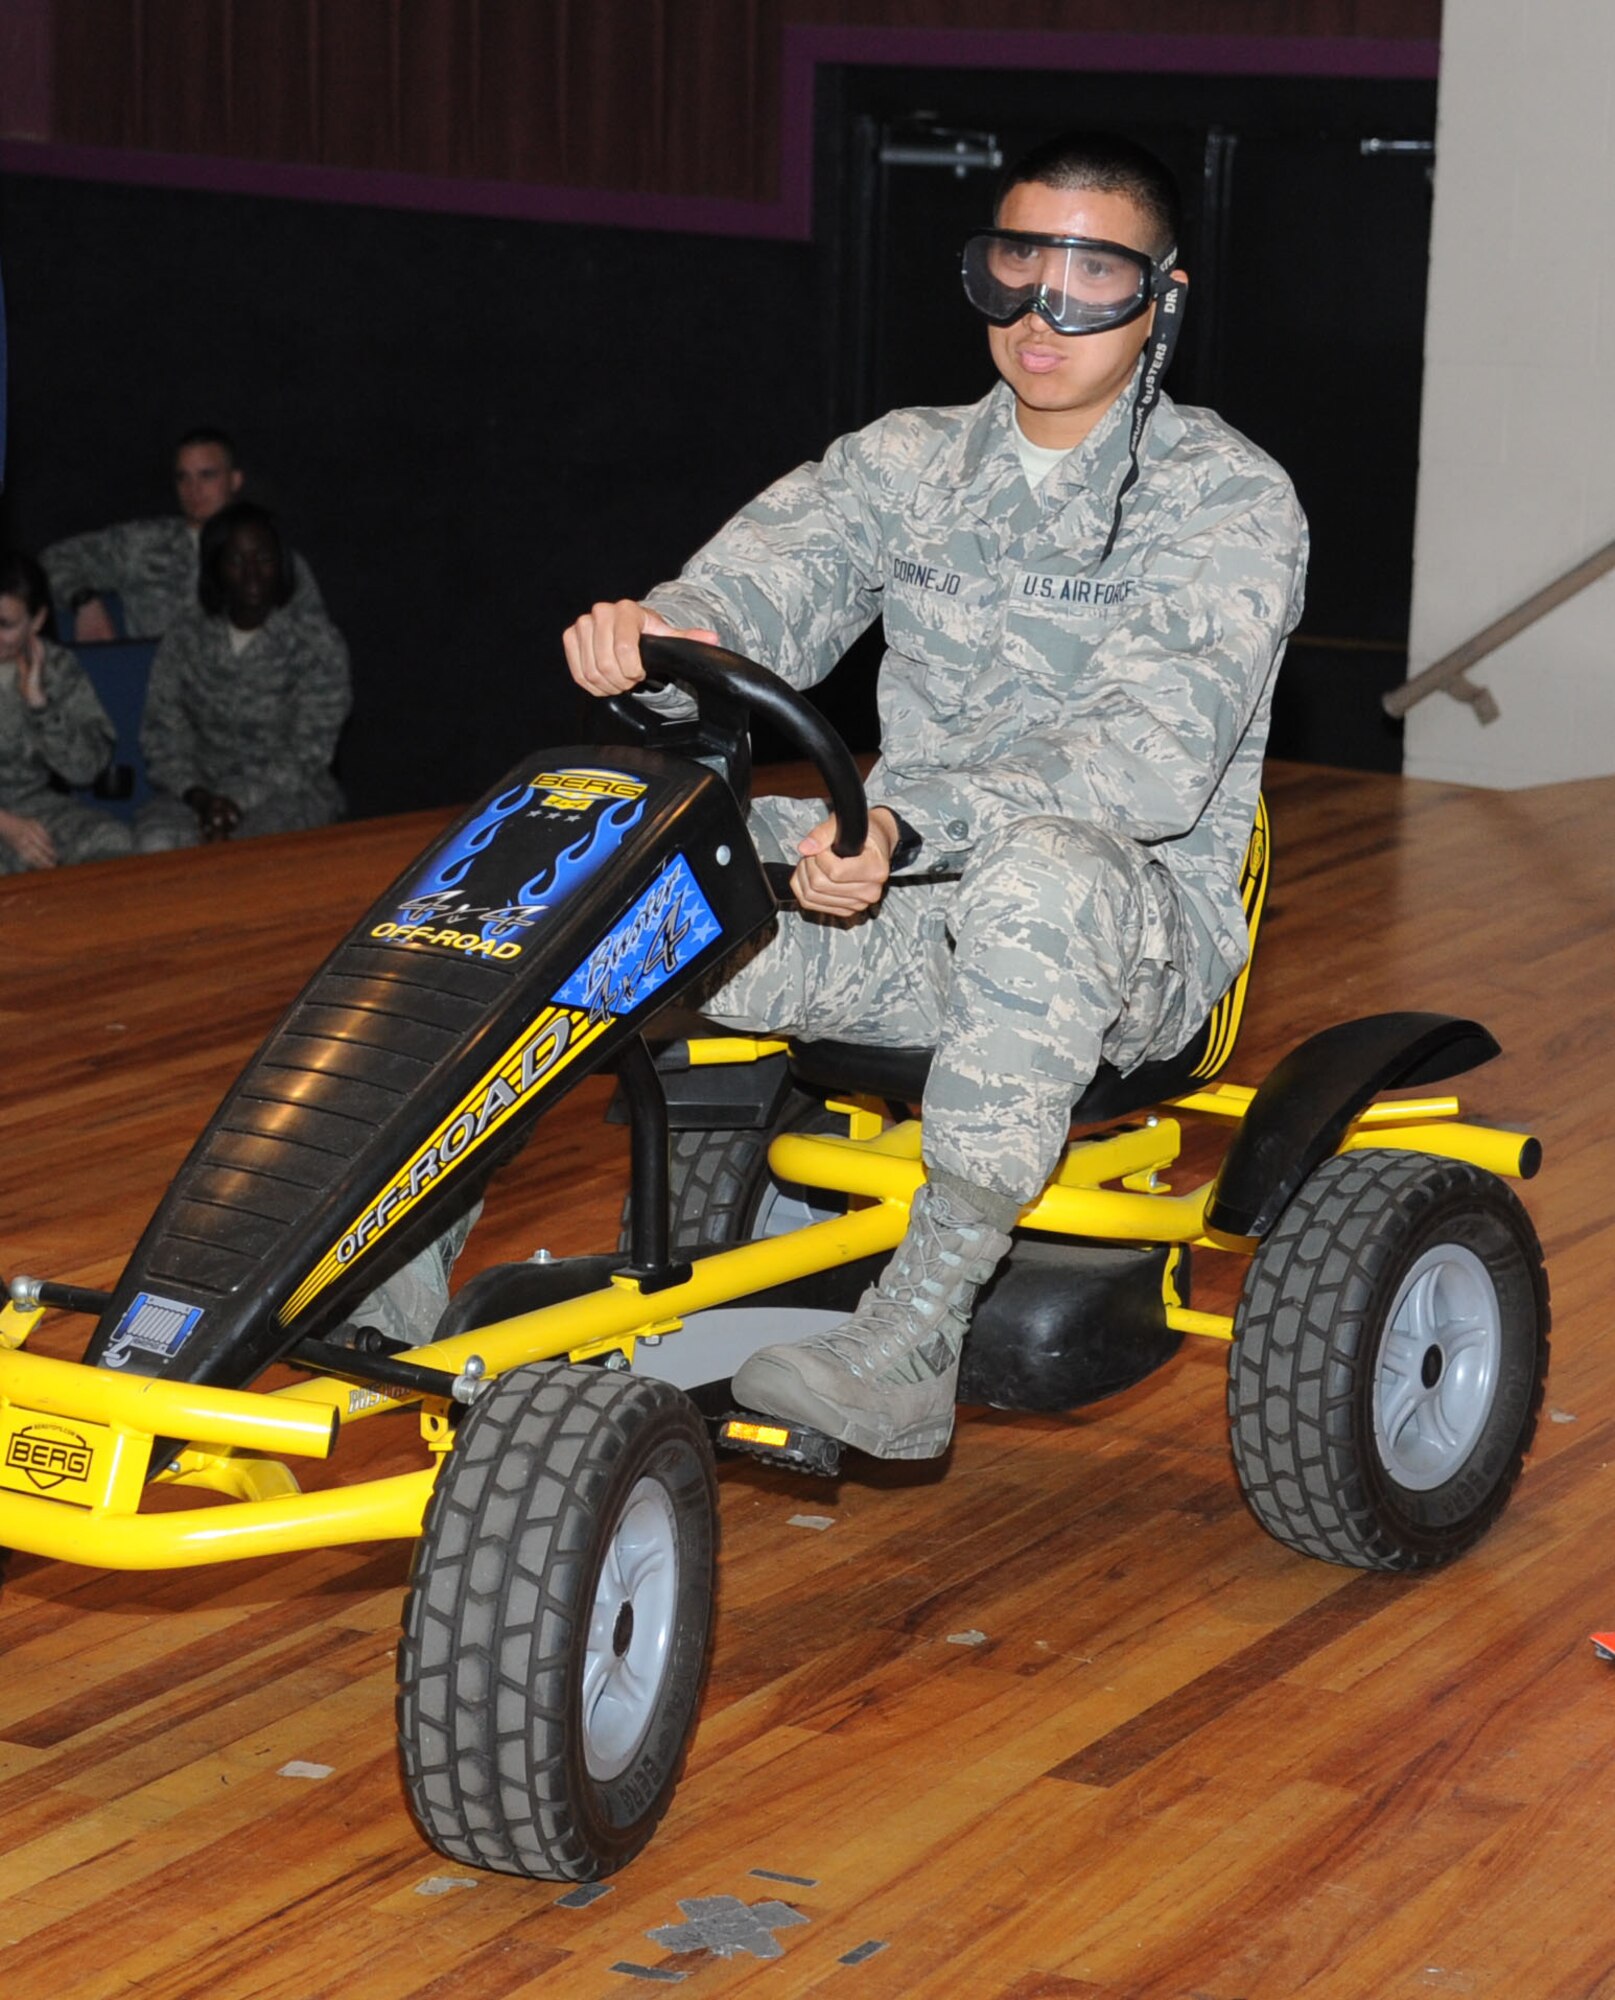 Airman Basic Esteban Cornejo, 334th Training Squadron, operates a peddling cart  while wearing drunk goggles to simulate being intoxicated over the legal limit during a drunk busters program Feb. 14, 2014, at the Welch Theater, Keesler Air Force Base, Miss.  The drunk busters program illustrates the impact and effects of alcohol on a person’s senses and motor skills and is offered to those Airmen getting more responsibility through increase in transition privileges.  (U.S. Air Force photo by Kemberly Groue)